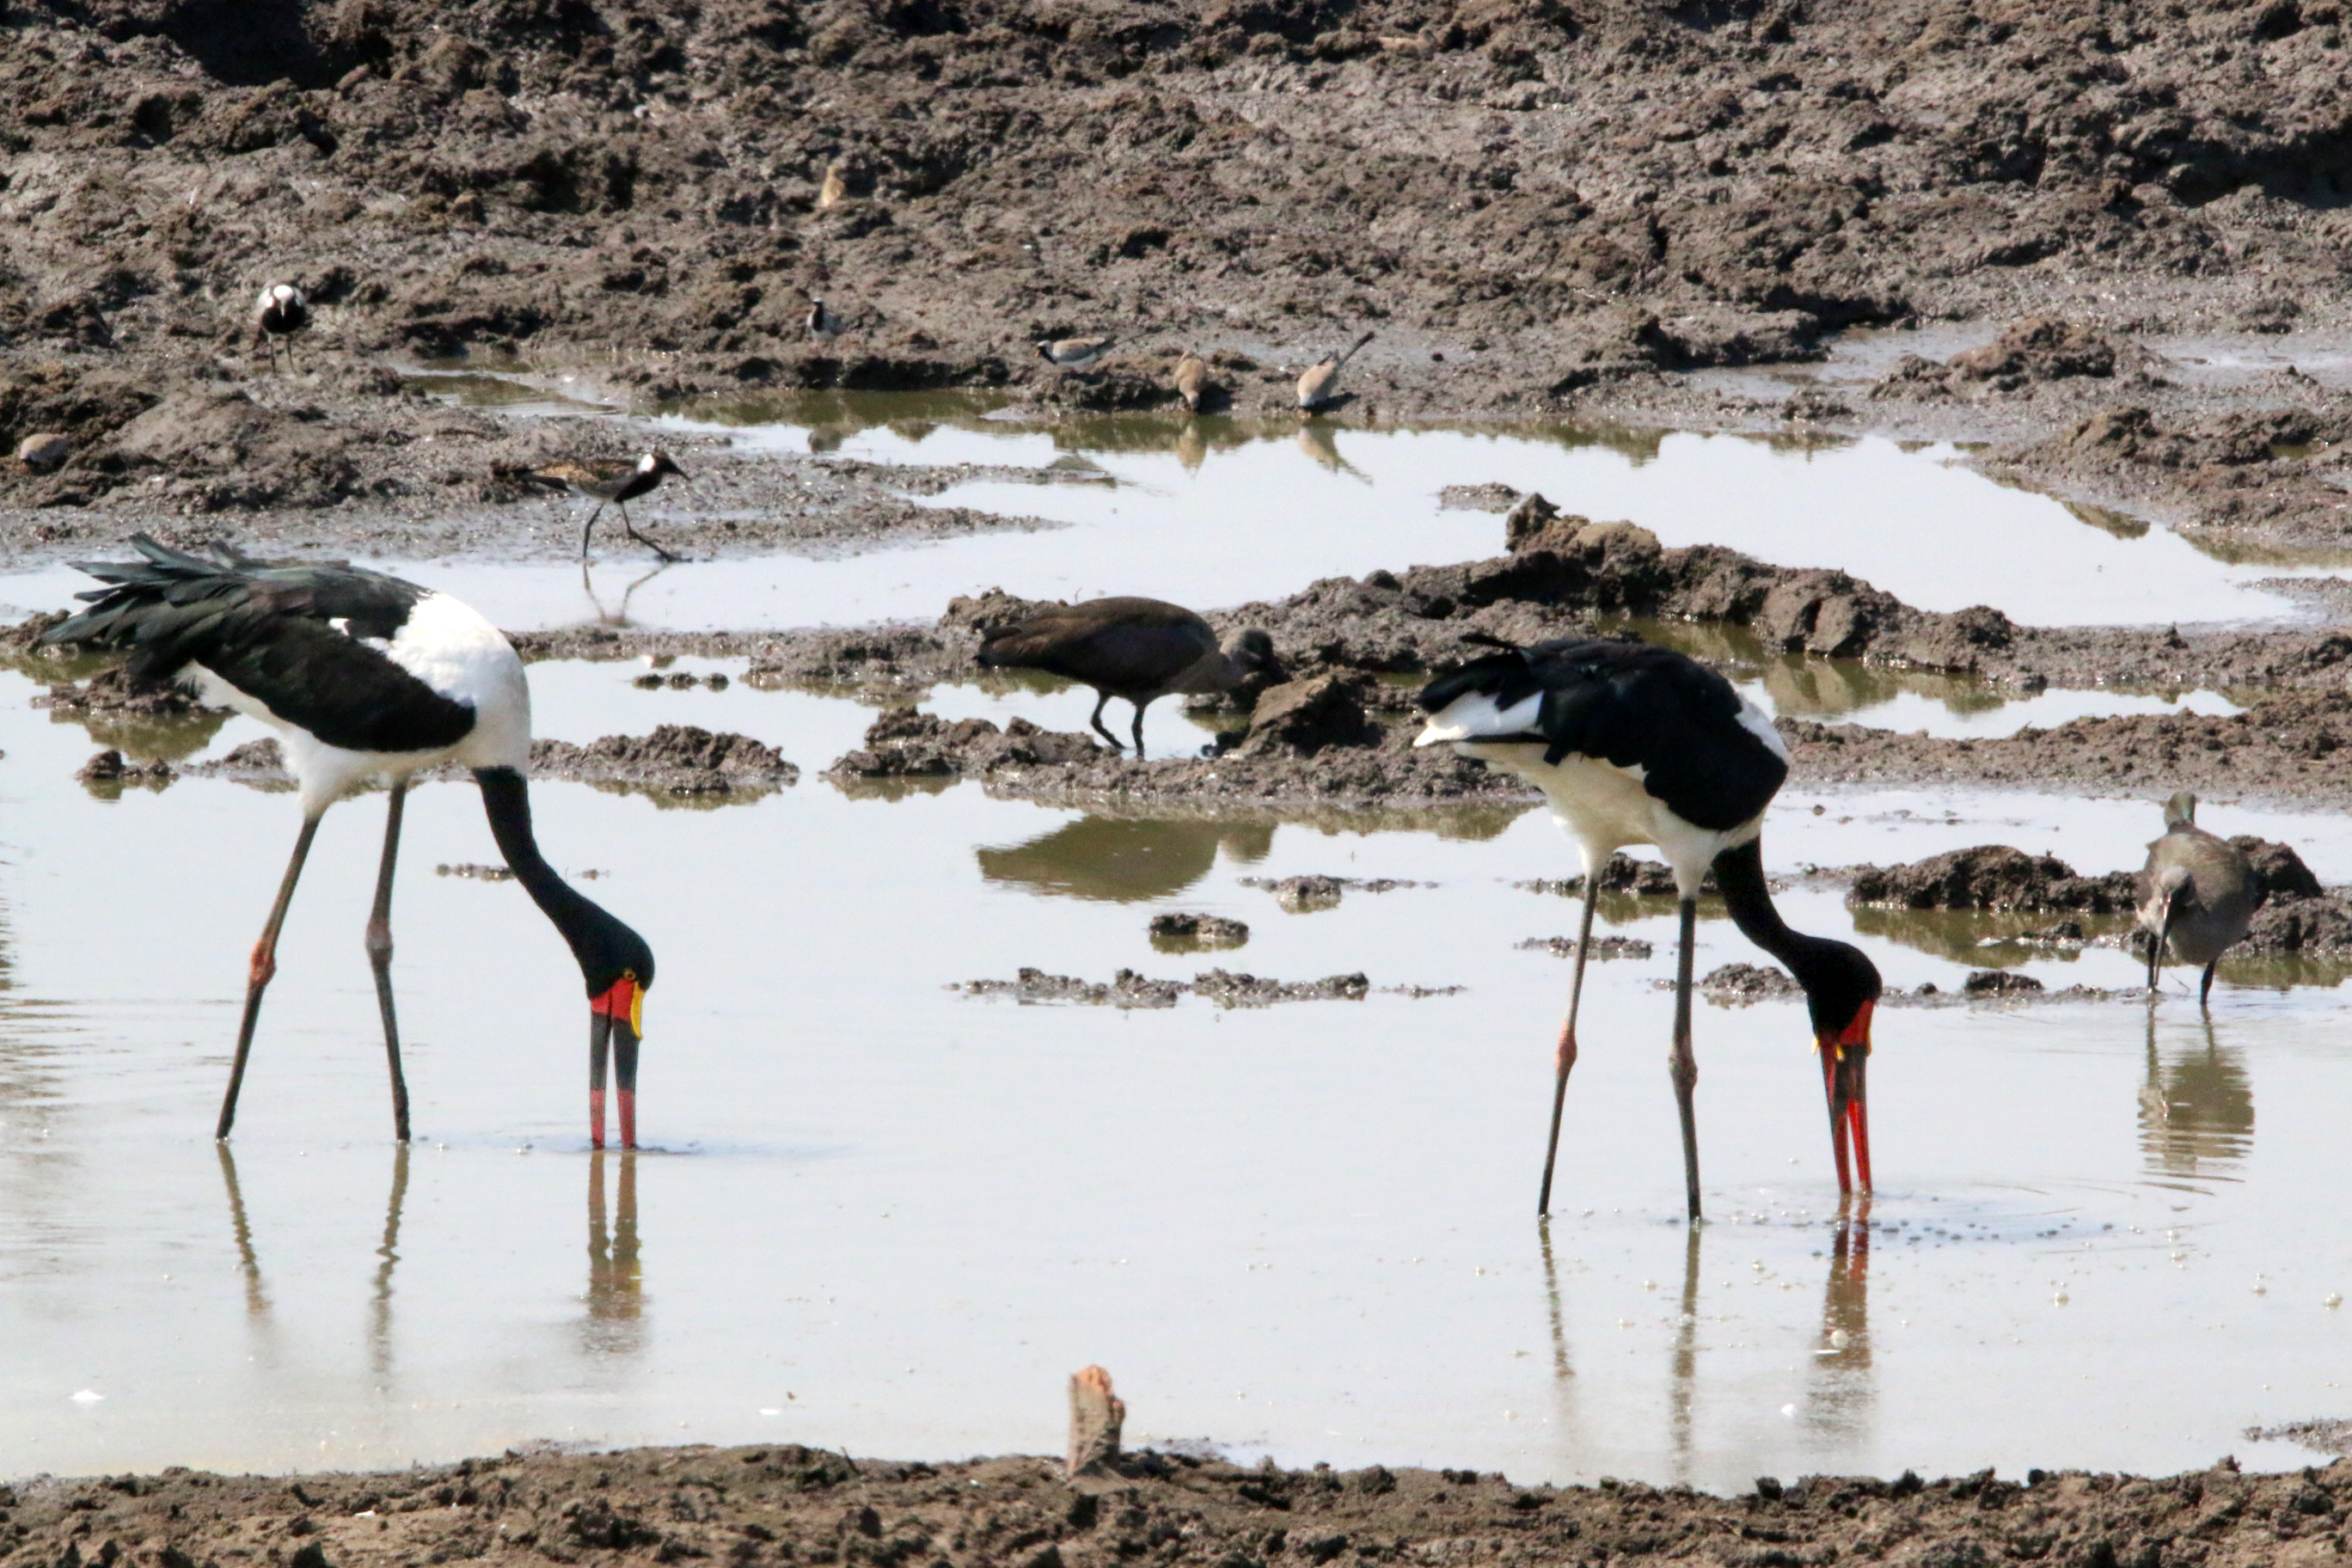  Saddle-billed storks in Africa foraging with their beaks partly below water. Spinosaurus may have done something similar. Image credit David Hone. Click image to download hi-res version.